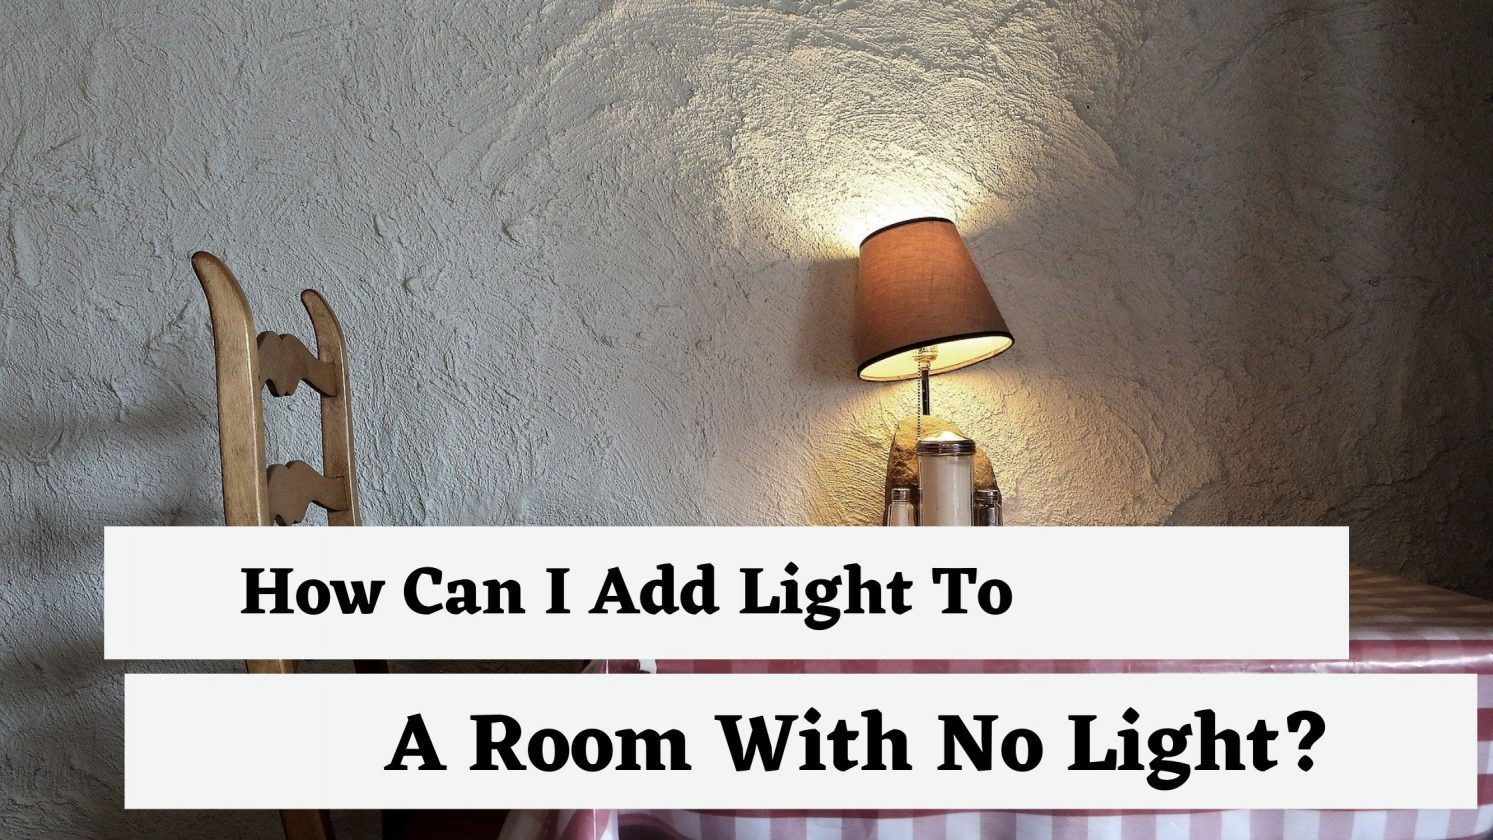 How Can I Add Light To A Room With No Light?